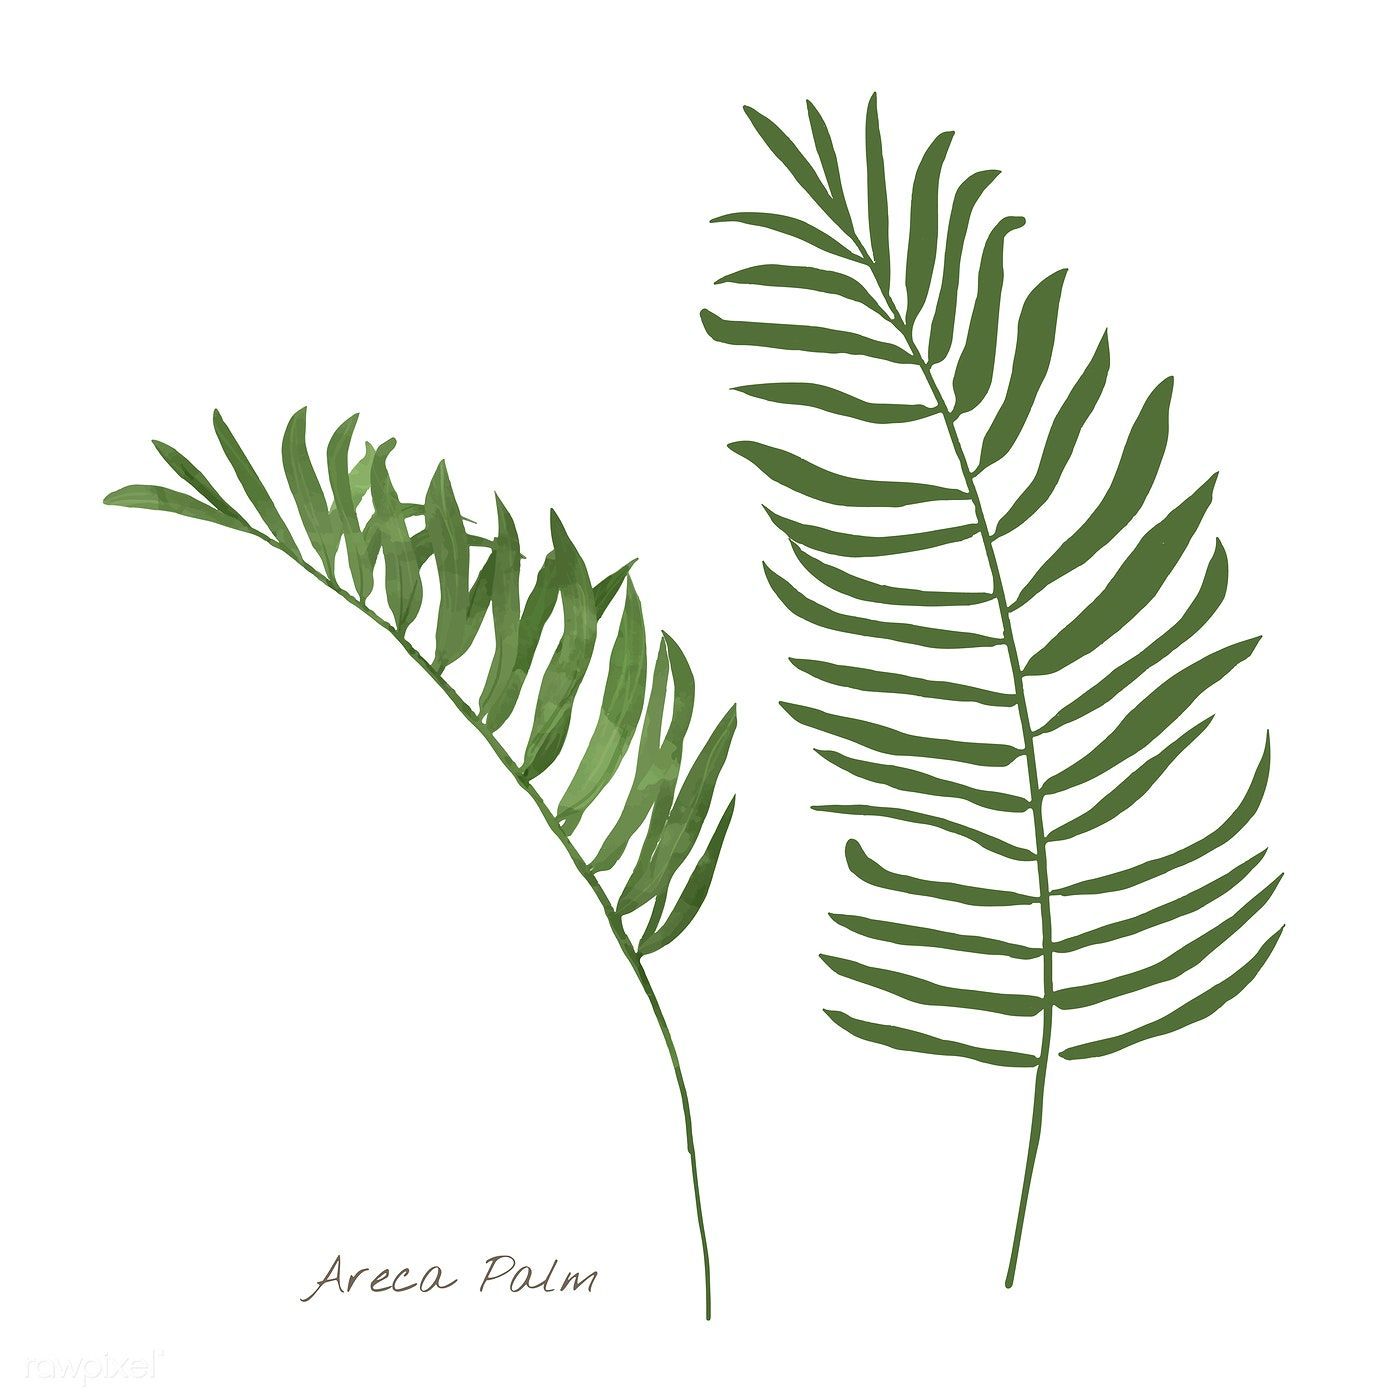 Download premium vector of Areca palm leaf isolated on white background -   11 palm plants Illustration ideas